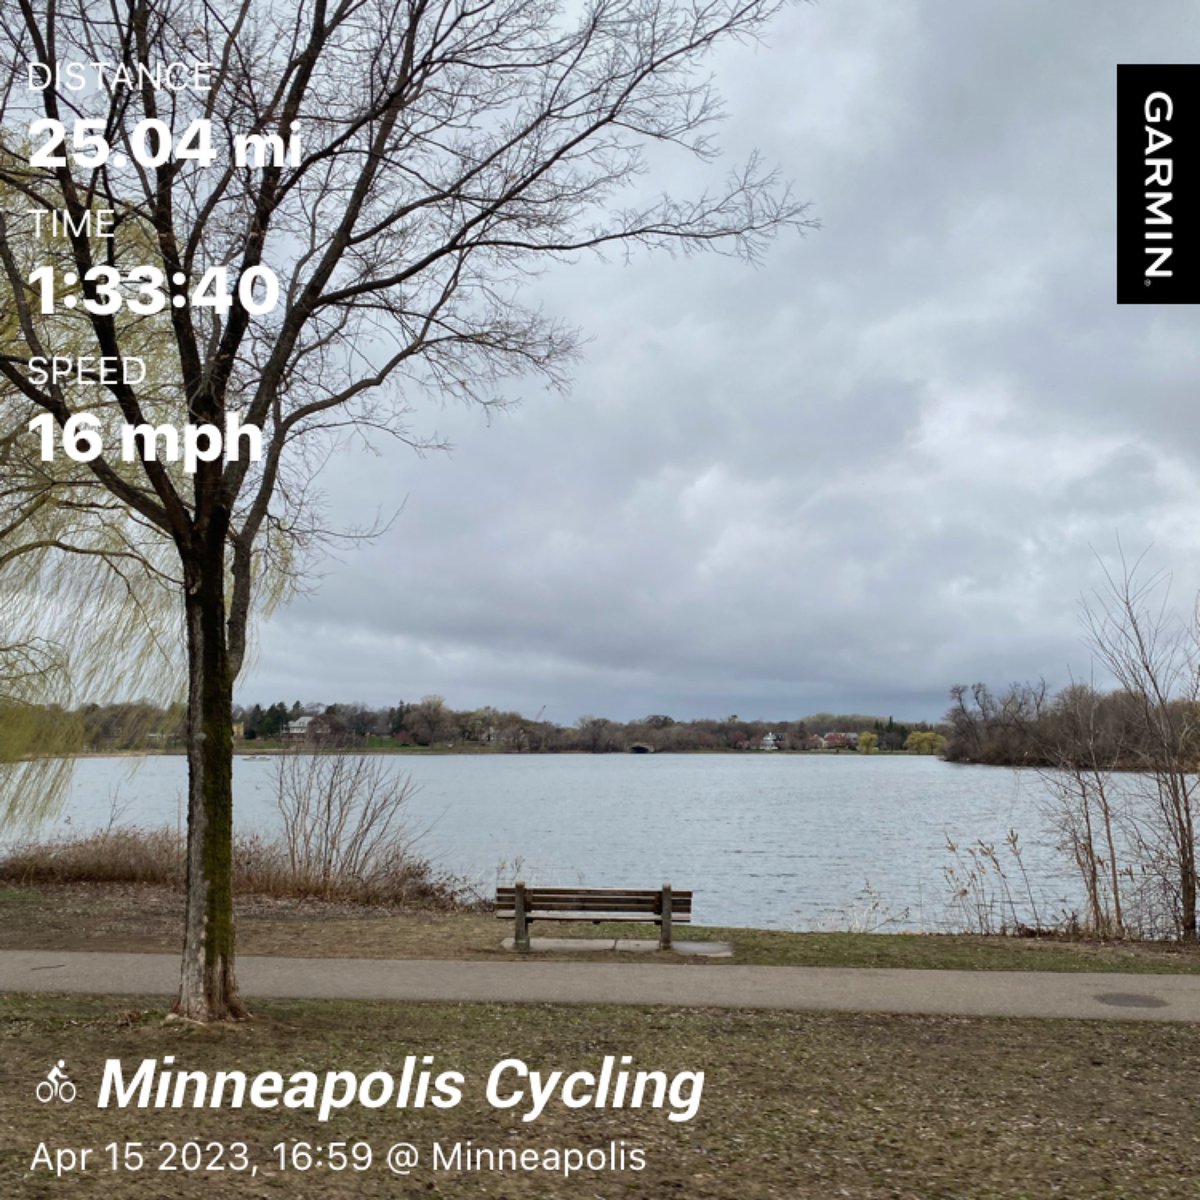 Basic Minneapolis loop; Greenway to Bde Maka Ska bike trail, past Lake Harriet to Minnehaha Parkway, to the West River Road to the Cedar Trail, Cedar Lake Parkway back to the Greenway. 

Bike trails the whole way, easy 25 miles.

#30daysofbiking  Day 15